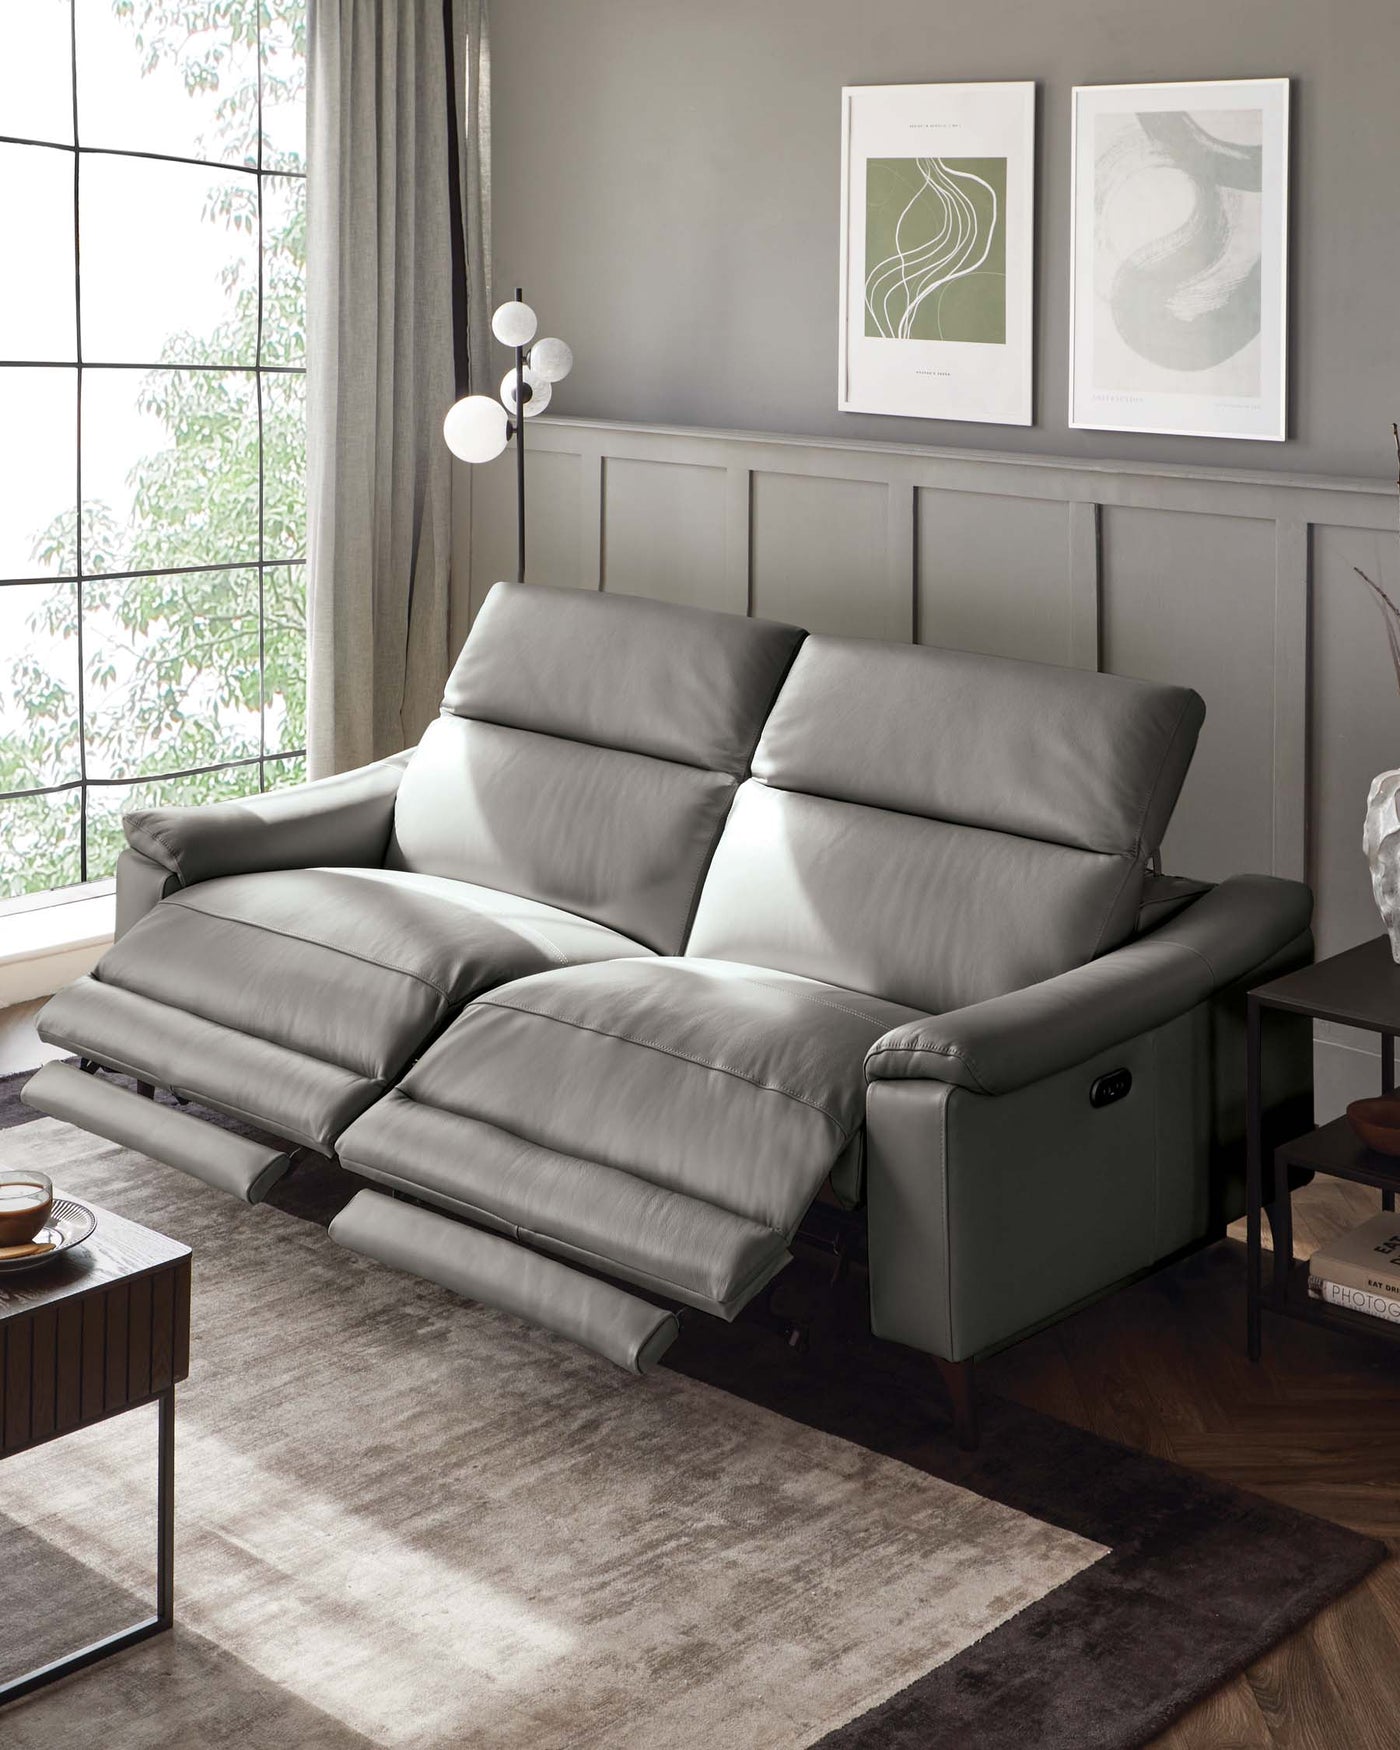 Modern three-seater leather recliner sofa in grey, featuring plush cushioning, with an adjustable backrest and footrest for comfort. A contemporary side table with a black metal frame and wooden top, along with an elegant floor lamp and grey-toned area rug, complements the chic and cosy living space setting.